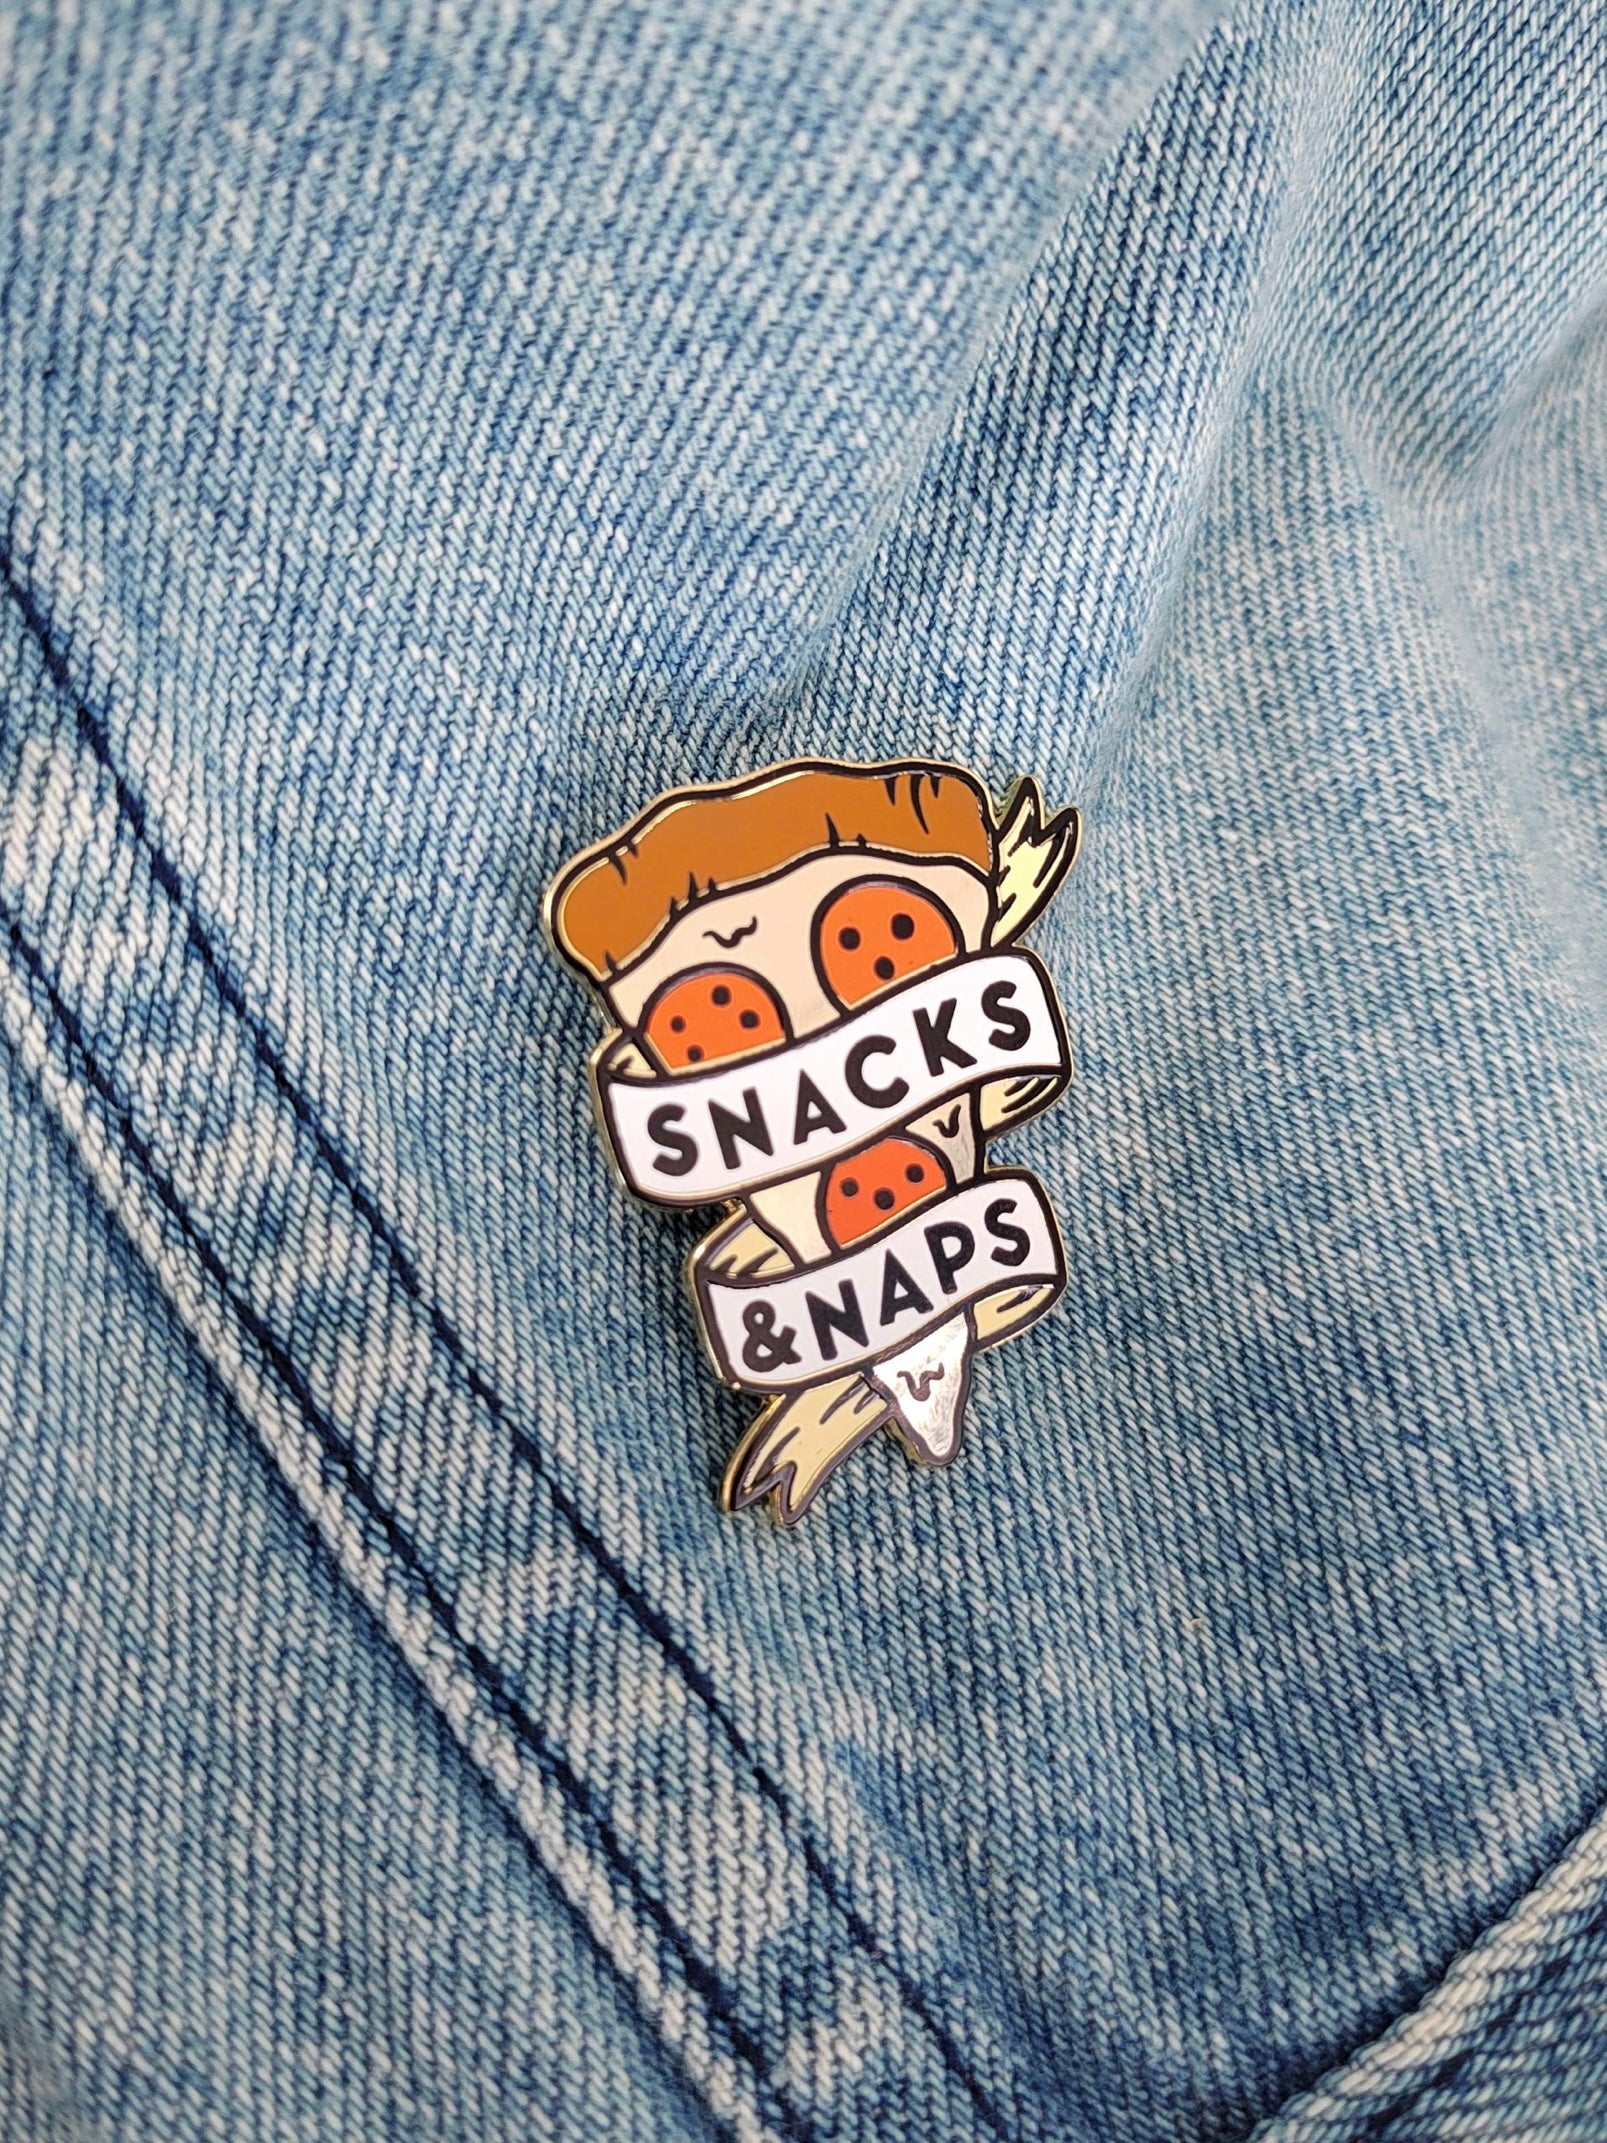 Snacks and Naps Pin - Octopied Mind